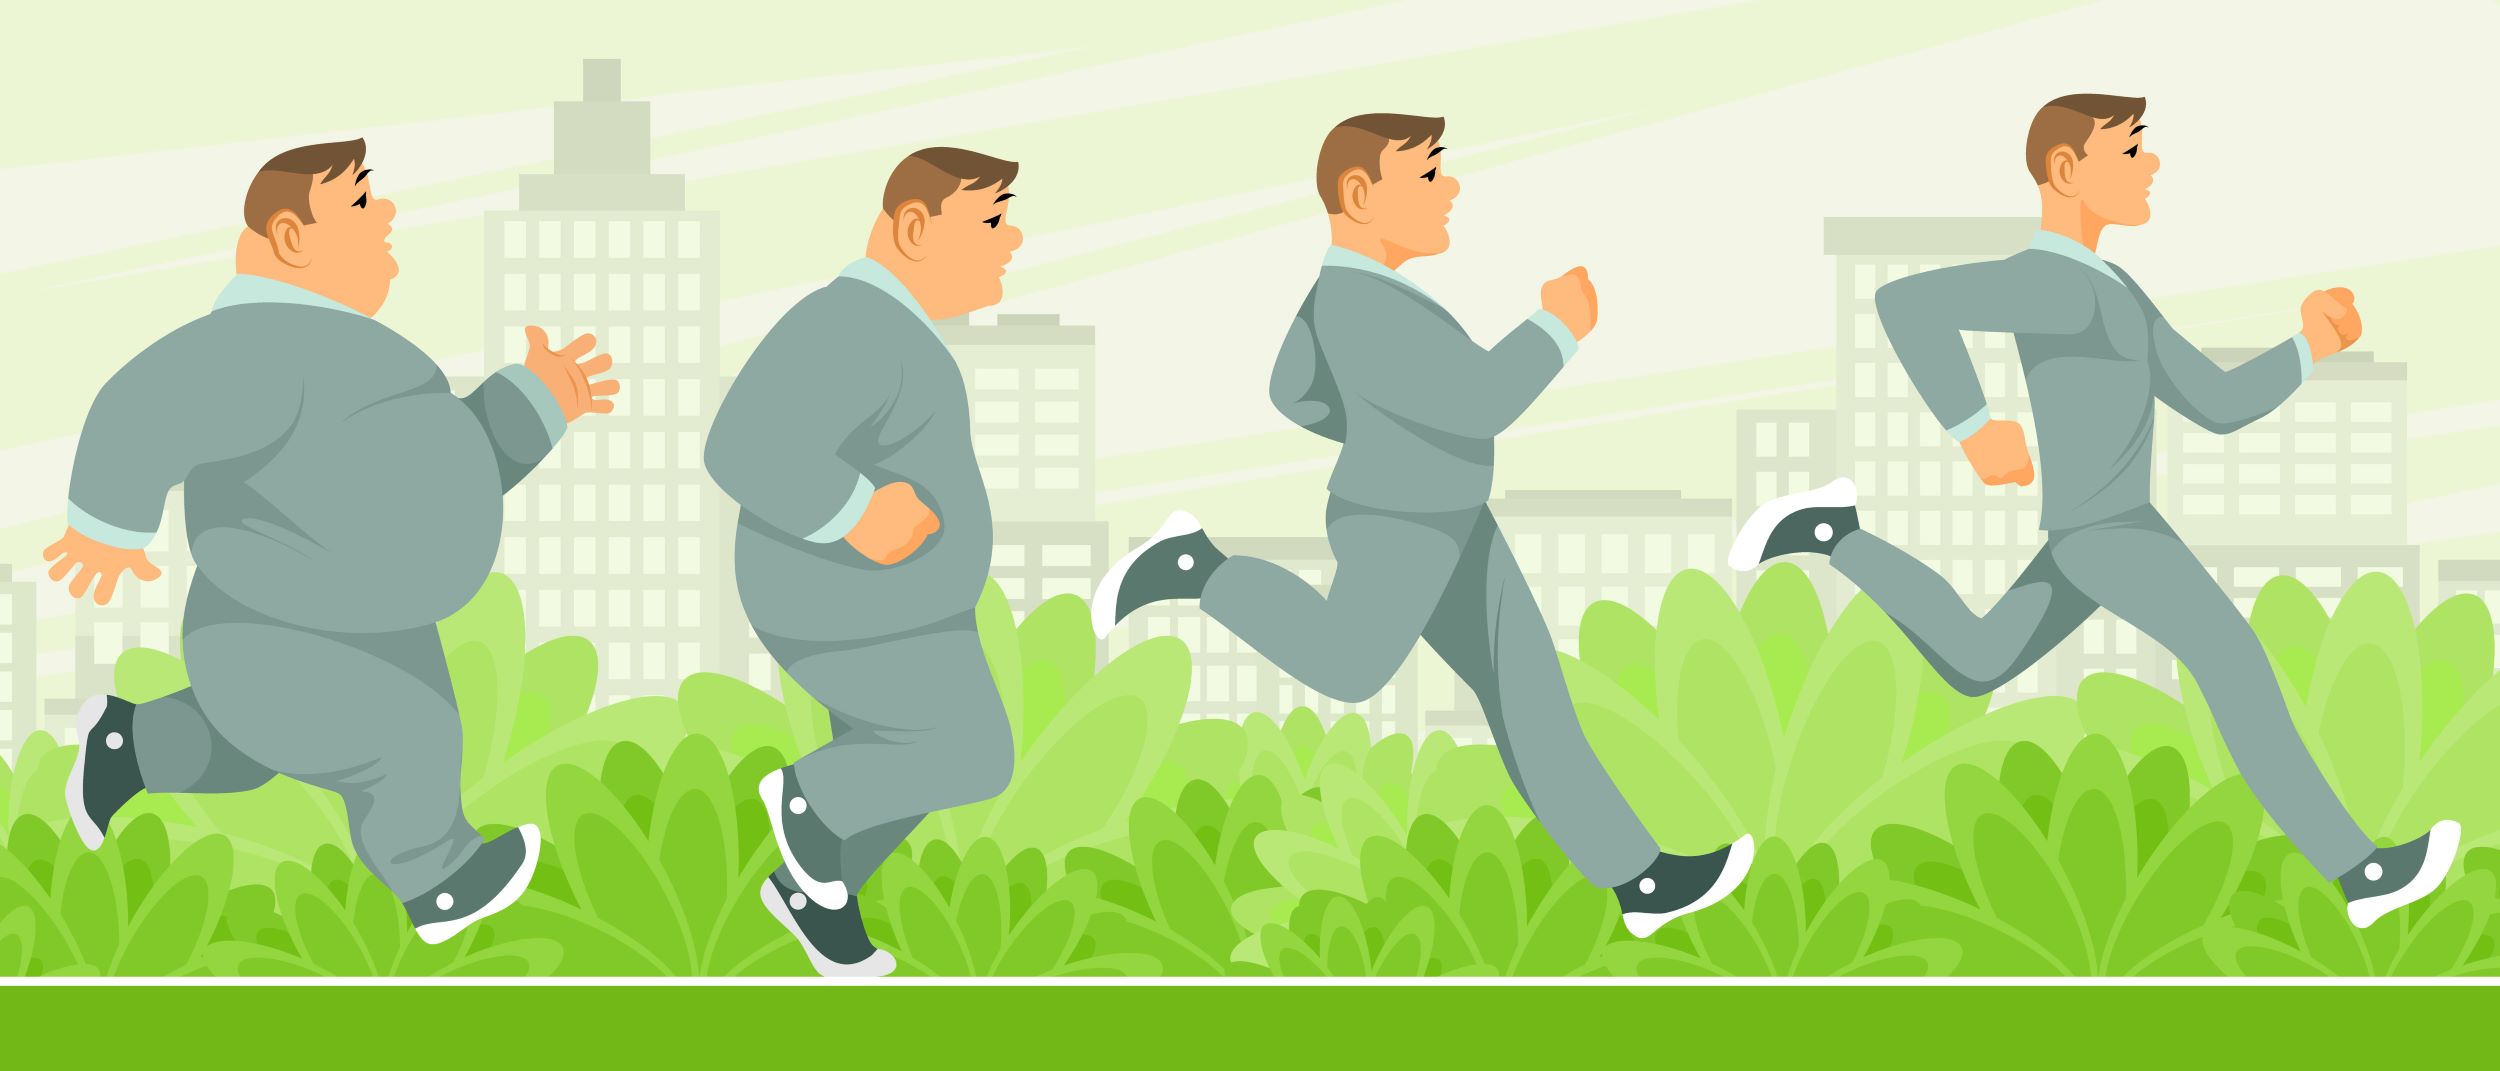 Four stages of a man getting fitter and slimmer through running.